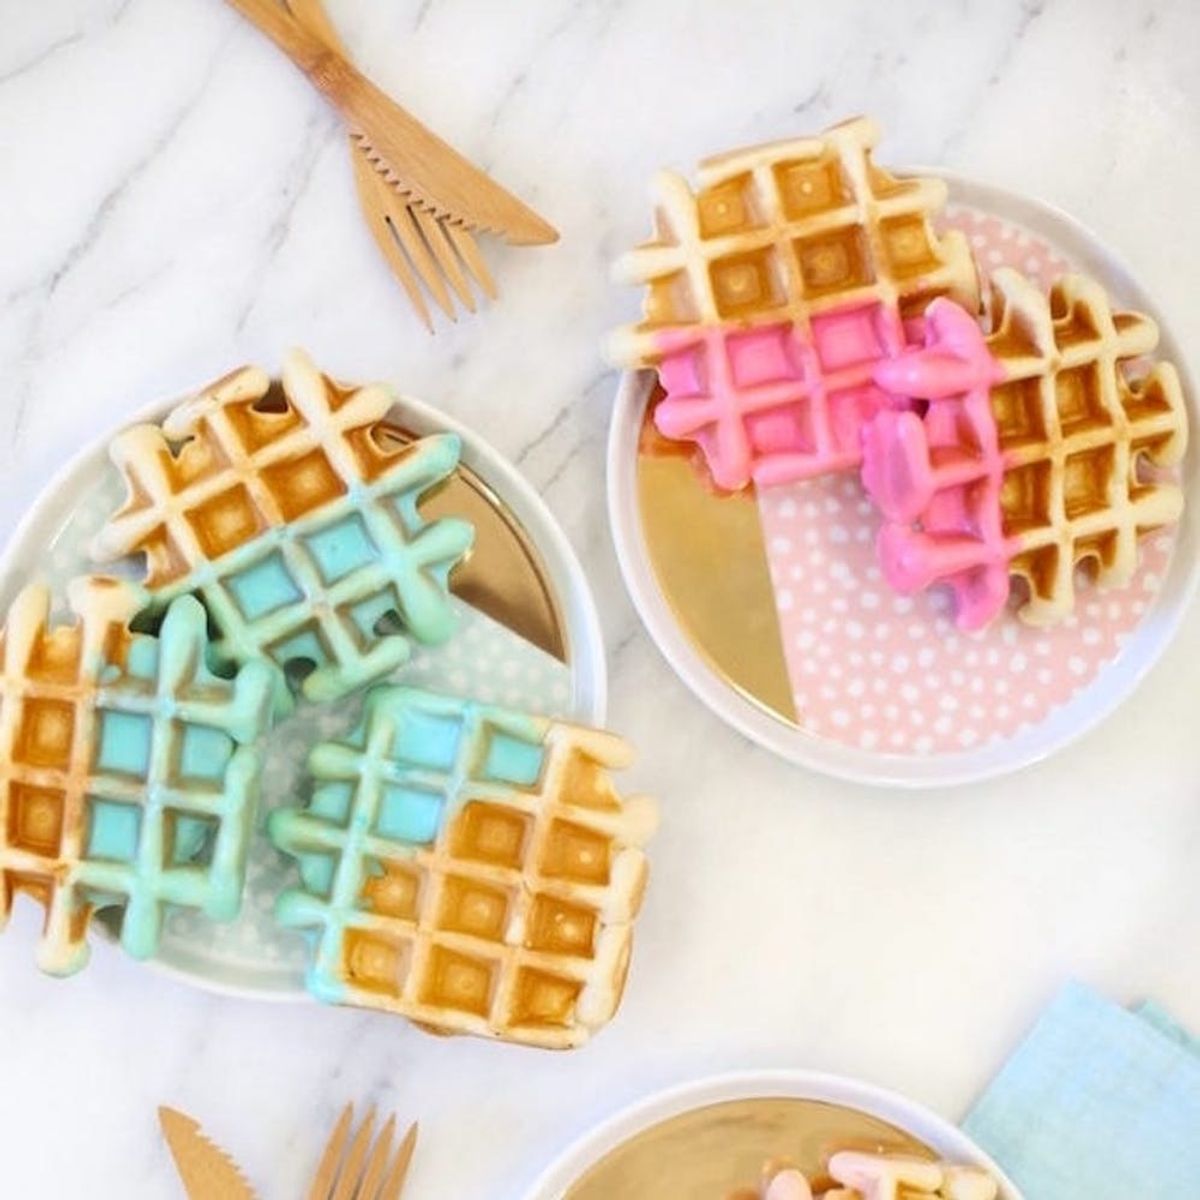 Brighten Things Up With These 13 Color Dipped Recipes